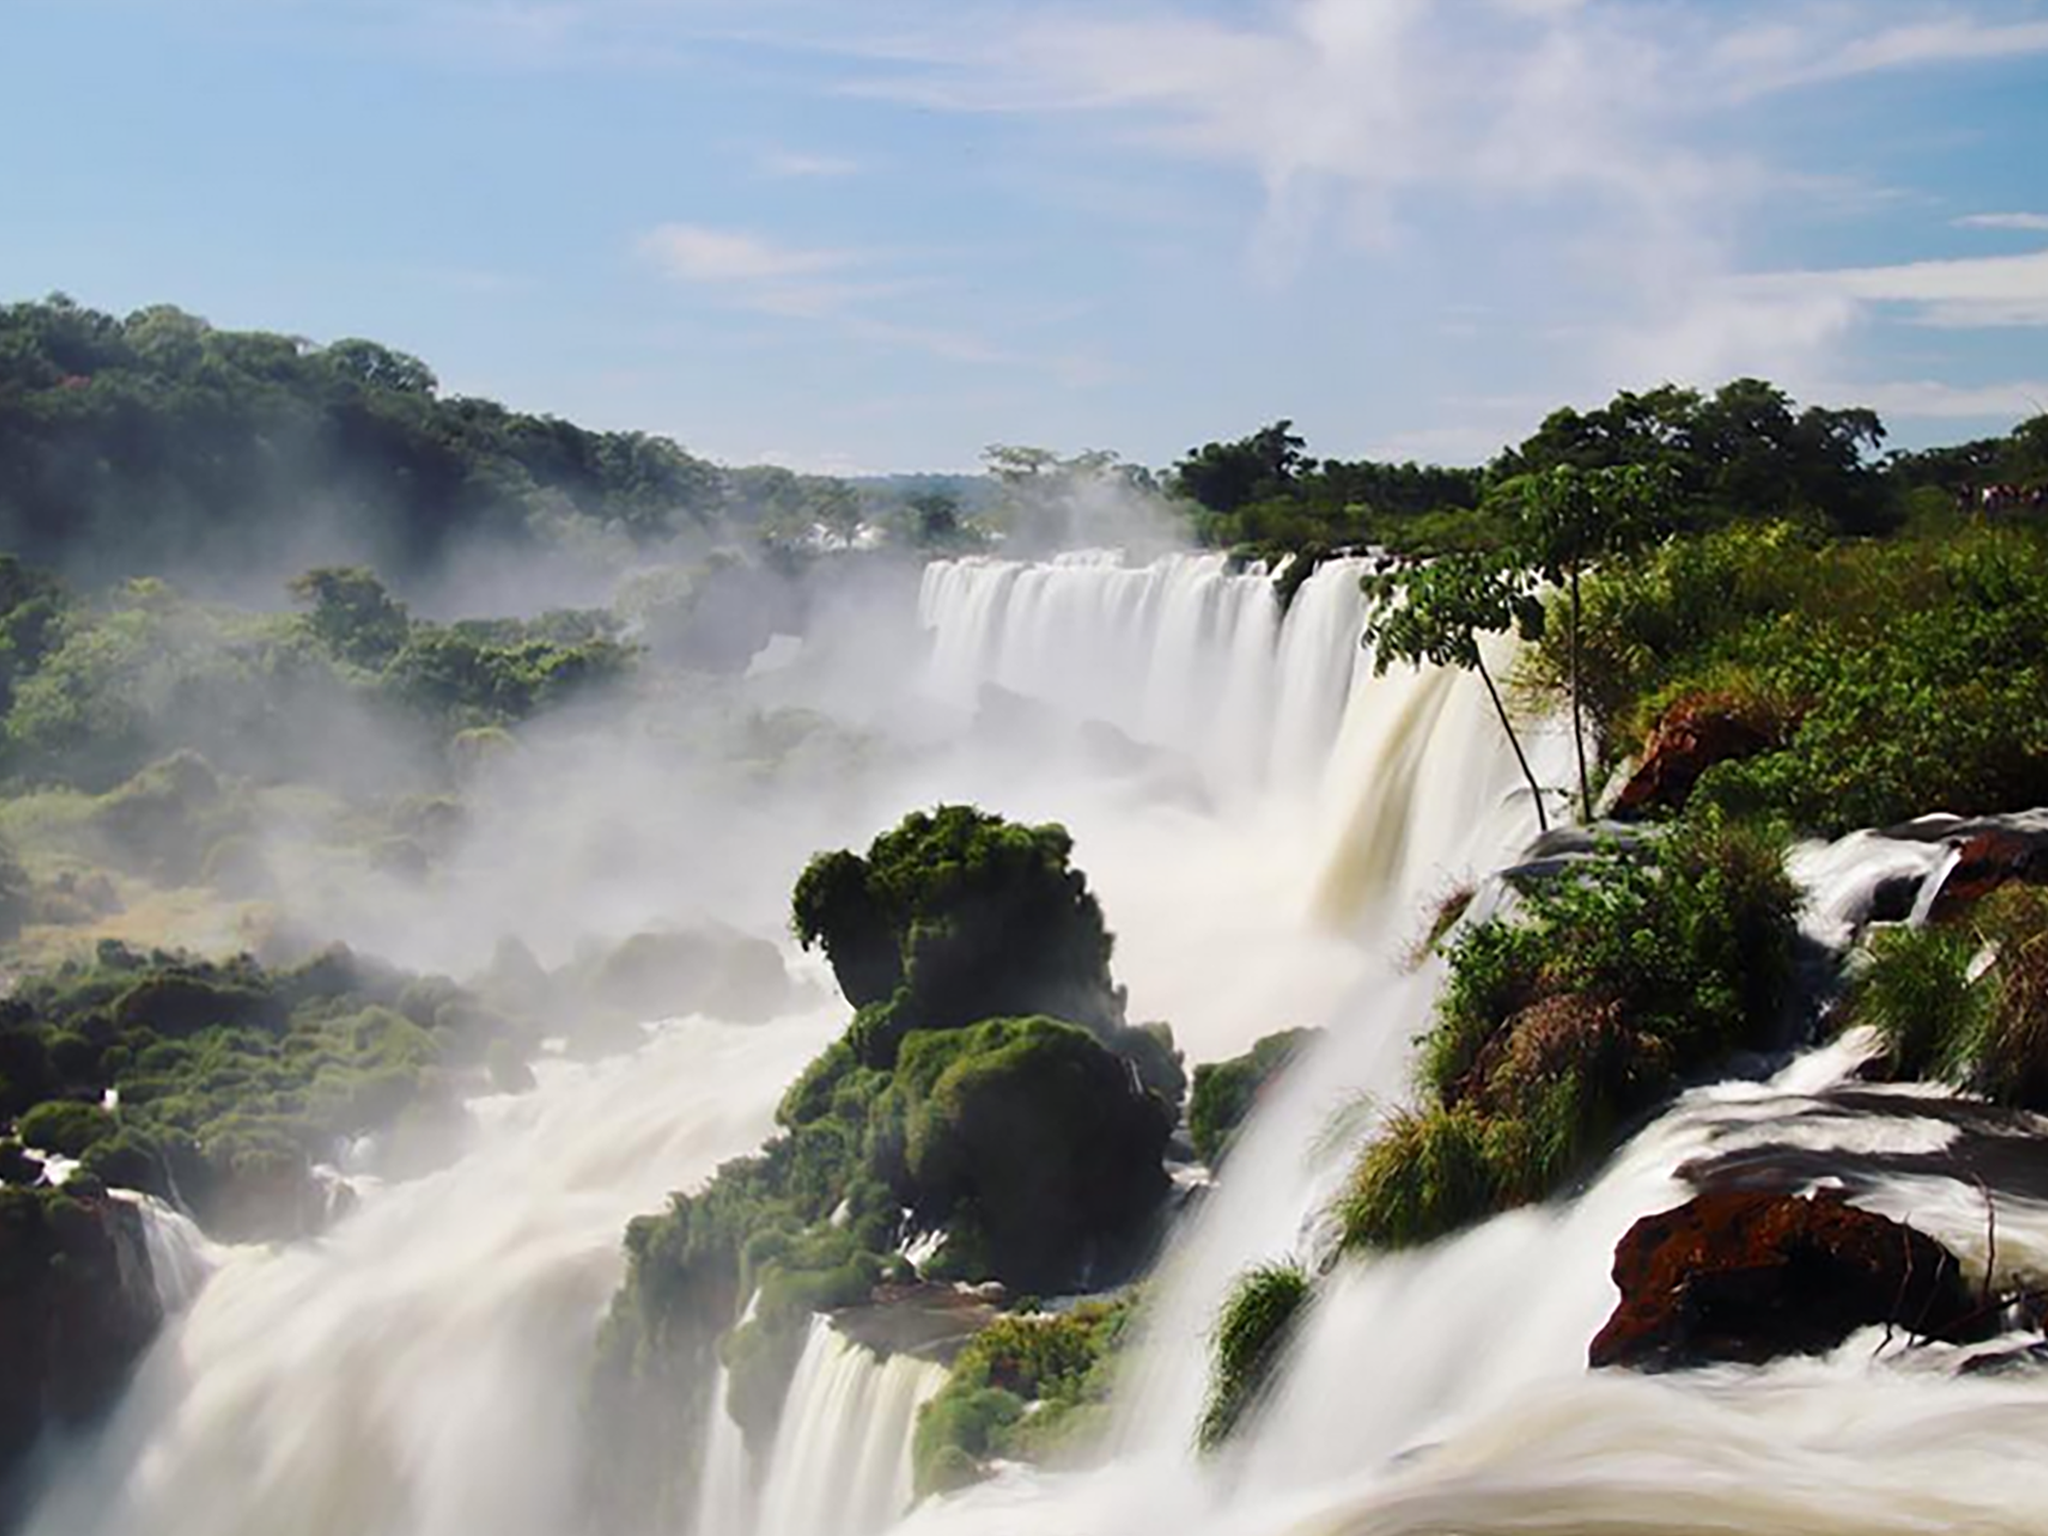 The Iguazu waterfalls are located on the border between Argentina and Brazil